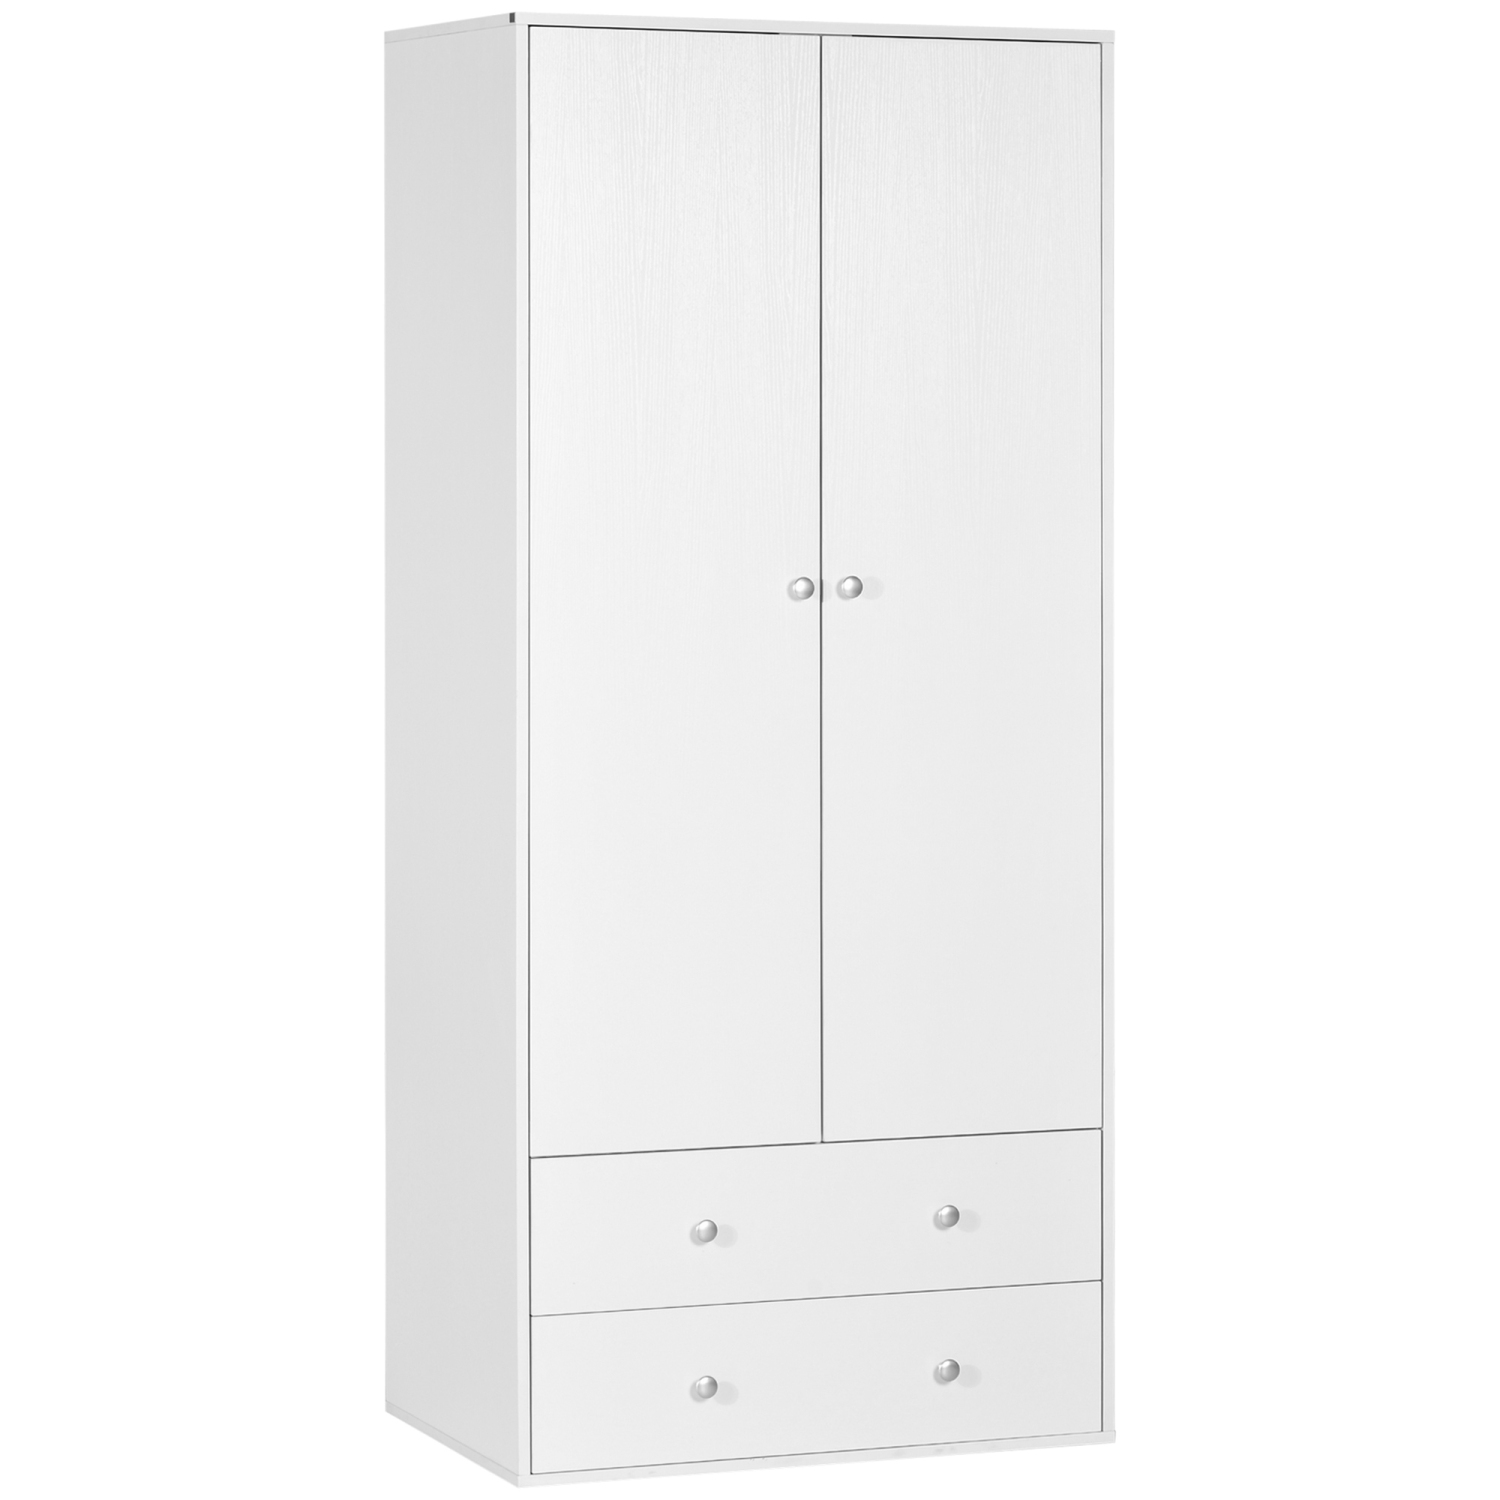 HOMCOM Wardrobe Closet, Armoire with Drawers and Hanging Rail for Bedroom Clothes Storage and Organization, White